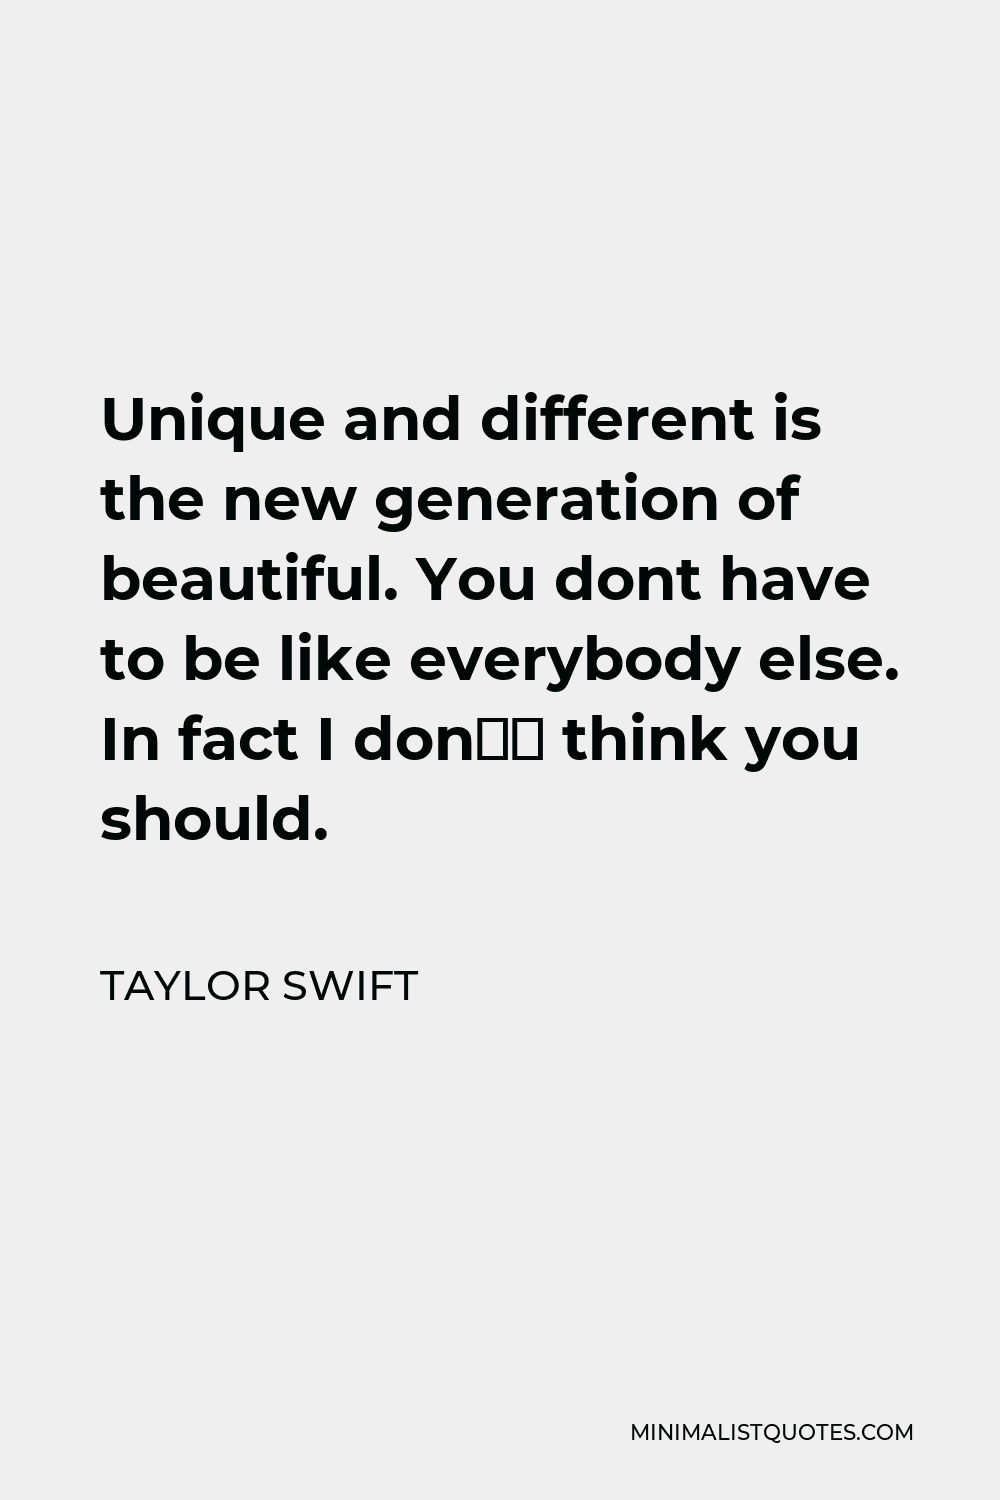 Taylor Swift quote: Unique and different is the new generation of